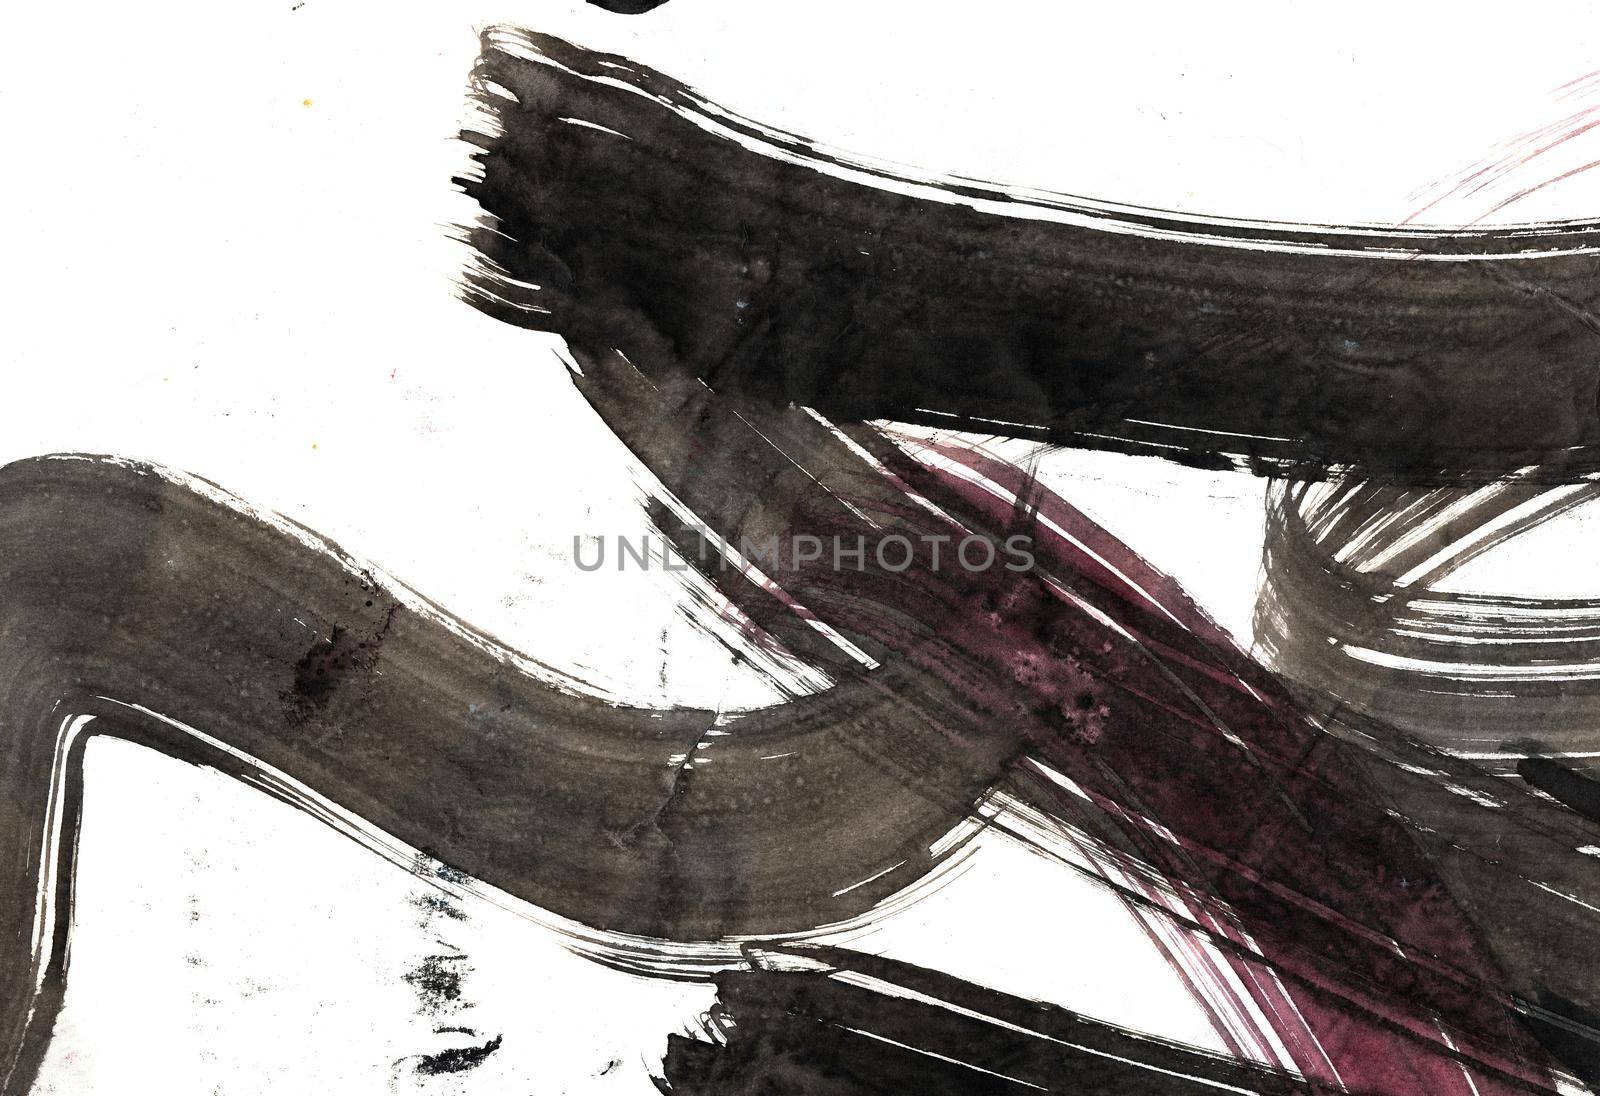 Abstract background with brush strokes, expressive calligraphy with elements of letters by maclura